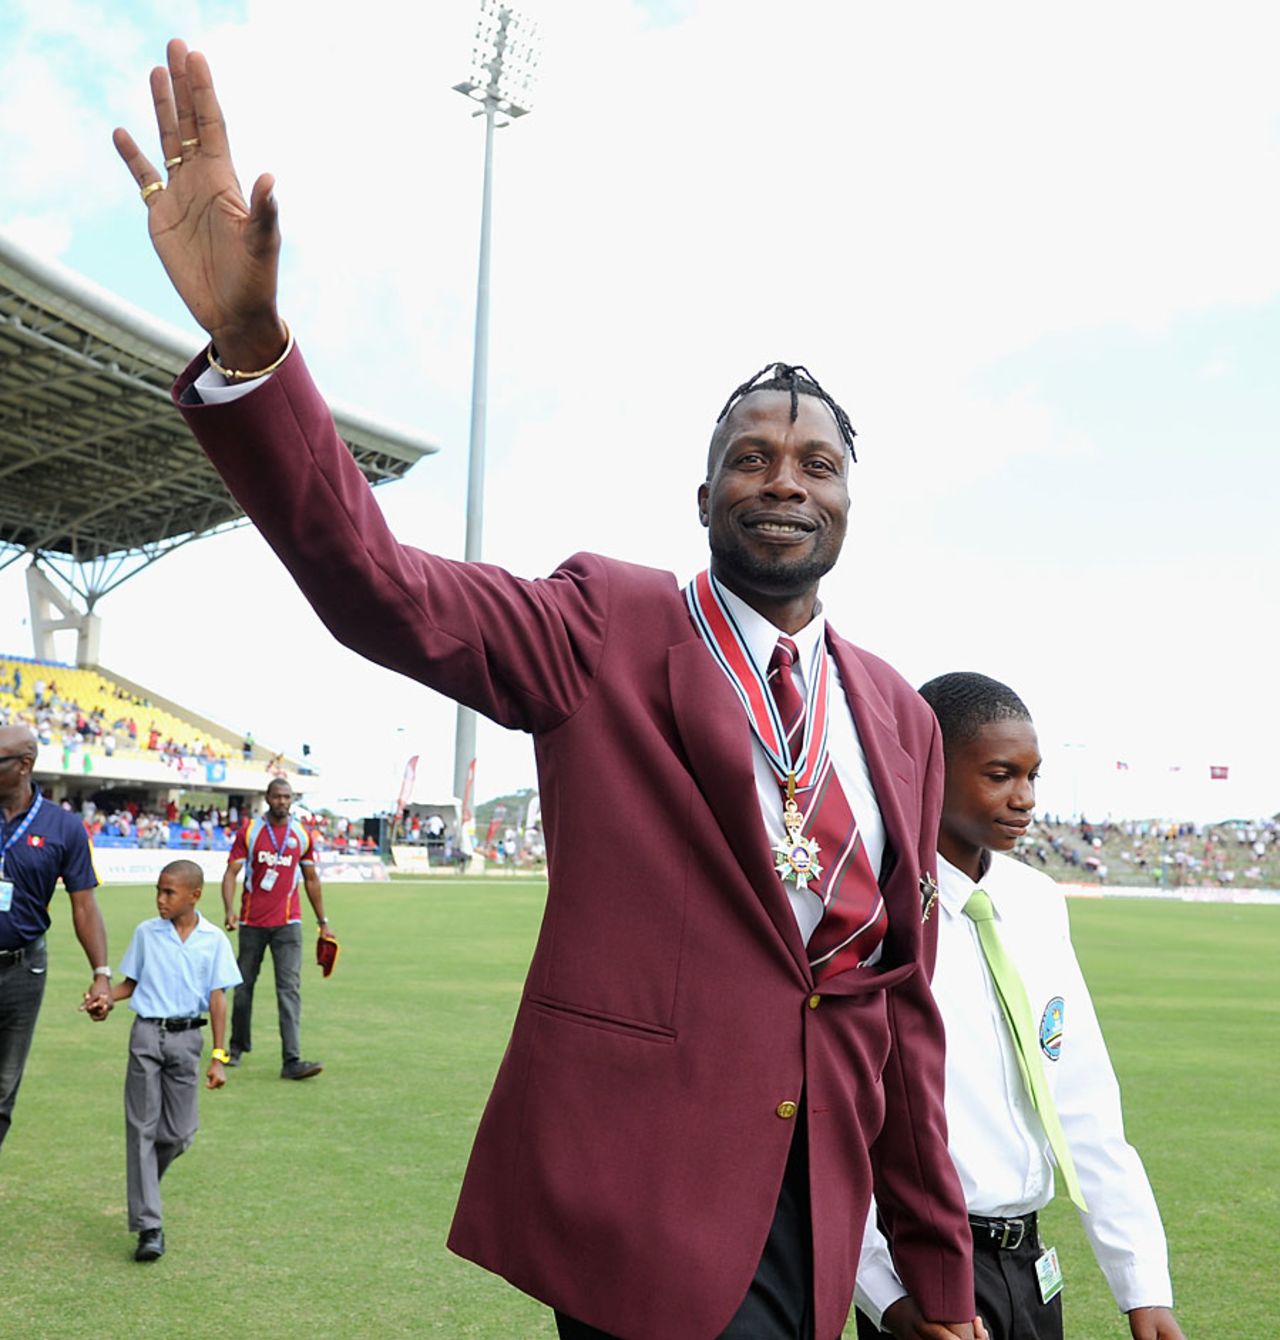 Curtly Ambrose waves to the crowd after his knighthood, West Indies v England, 1st ODI, North Sound, February 28, 2014